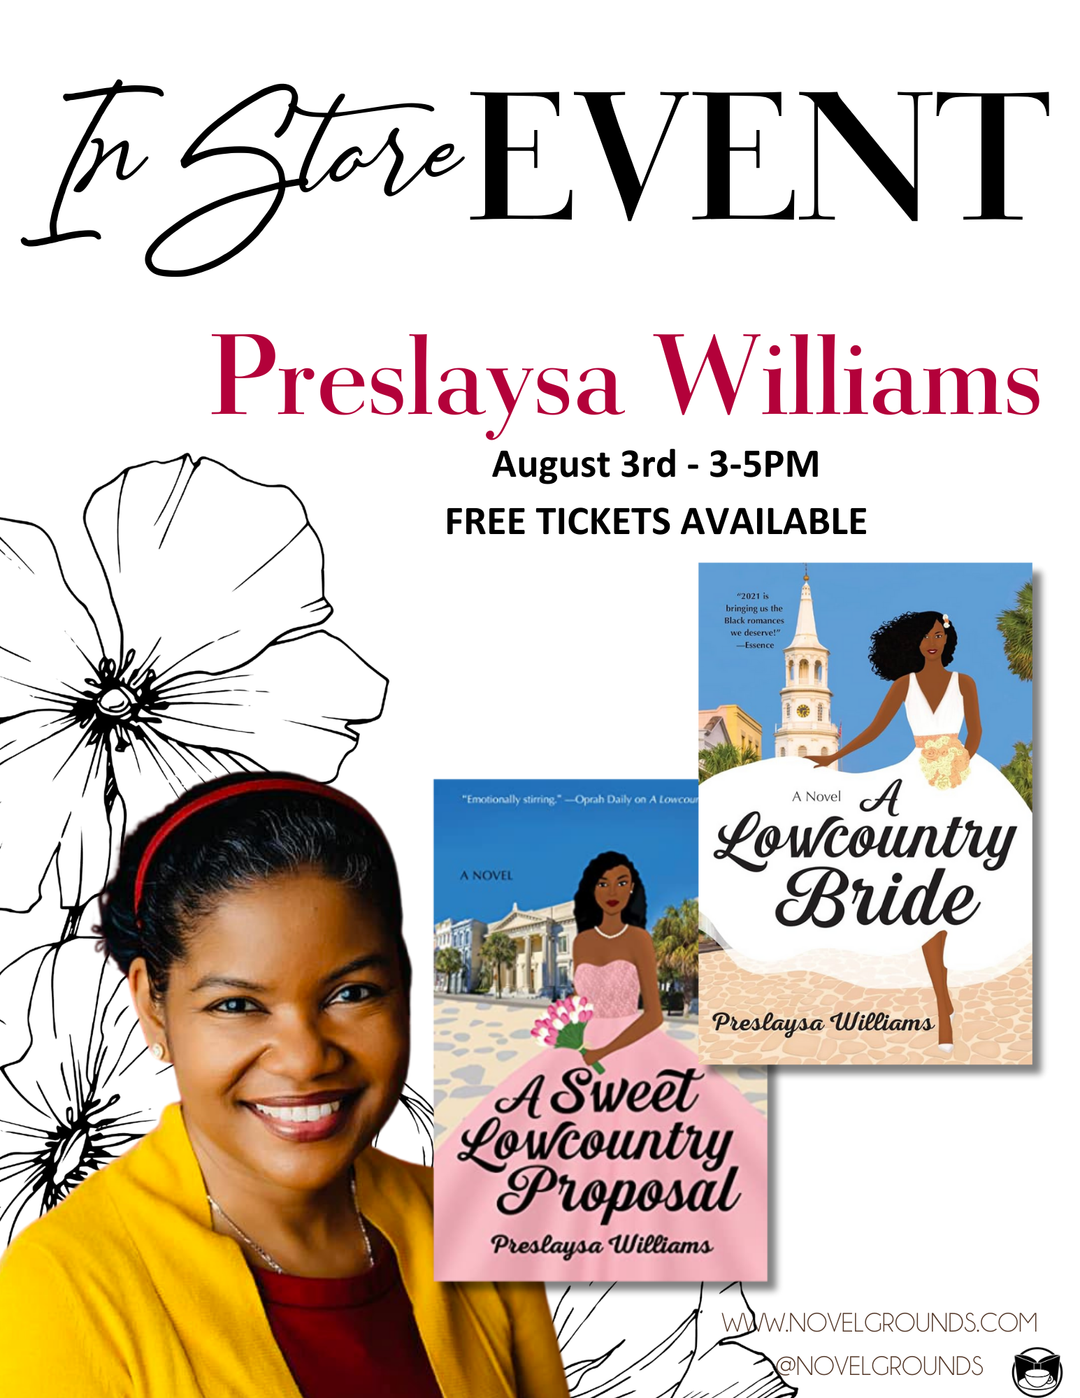 Preslaysa Williams Signing Event Ticket - August 3rd - 3-5pm